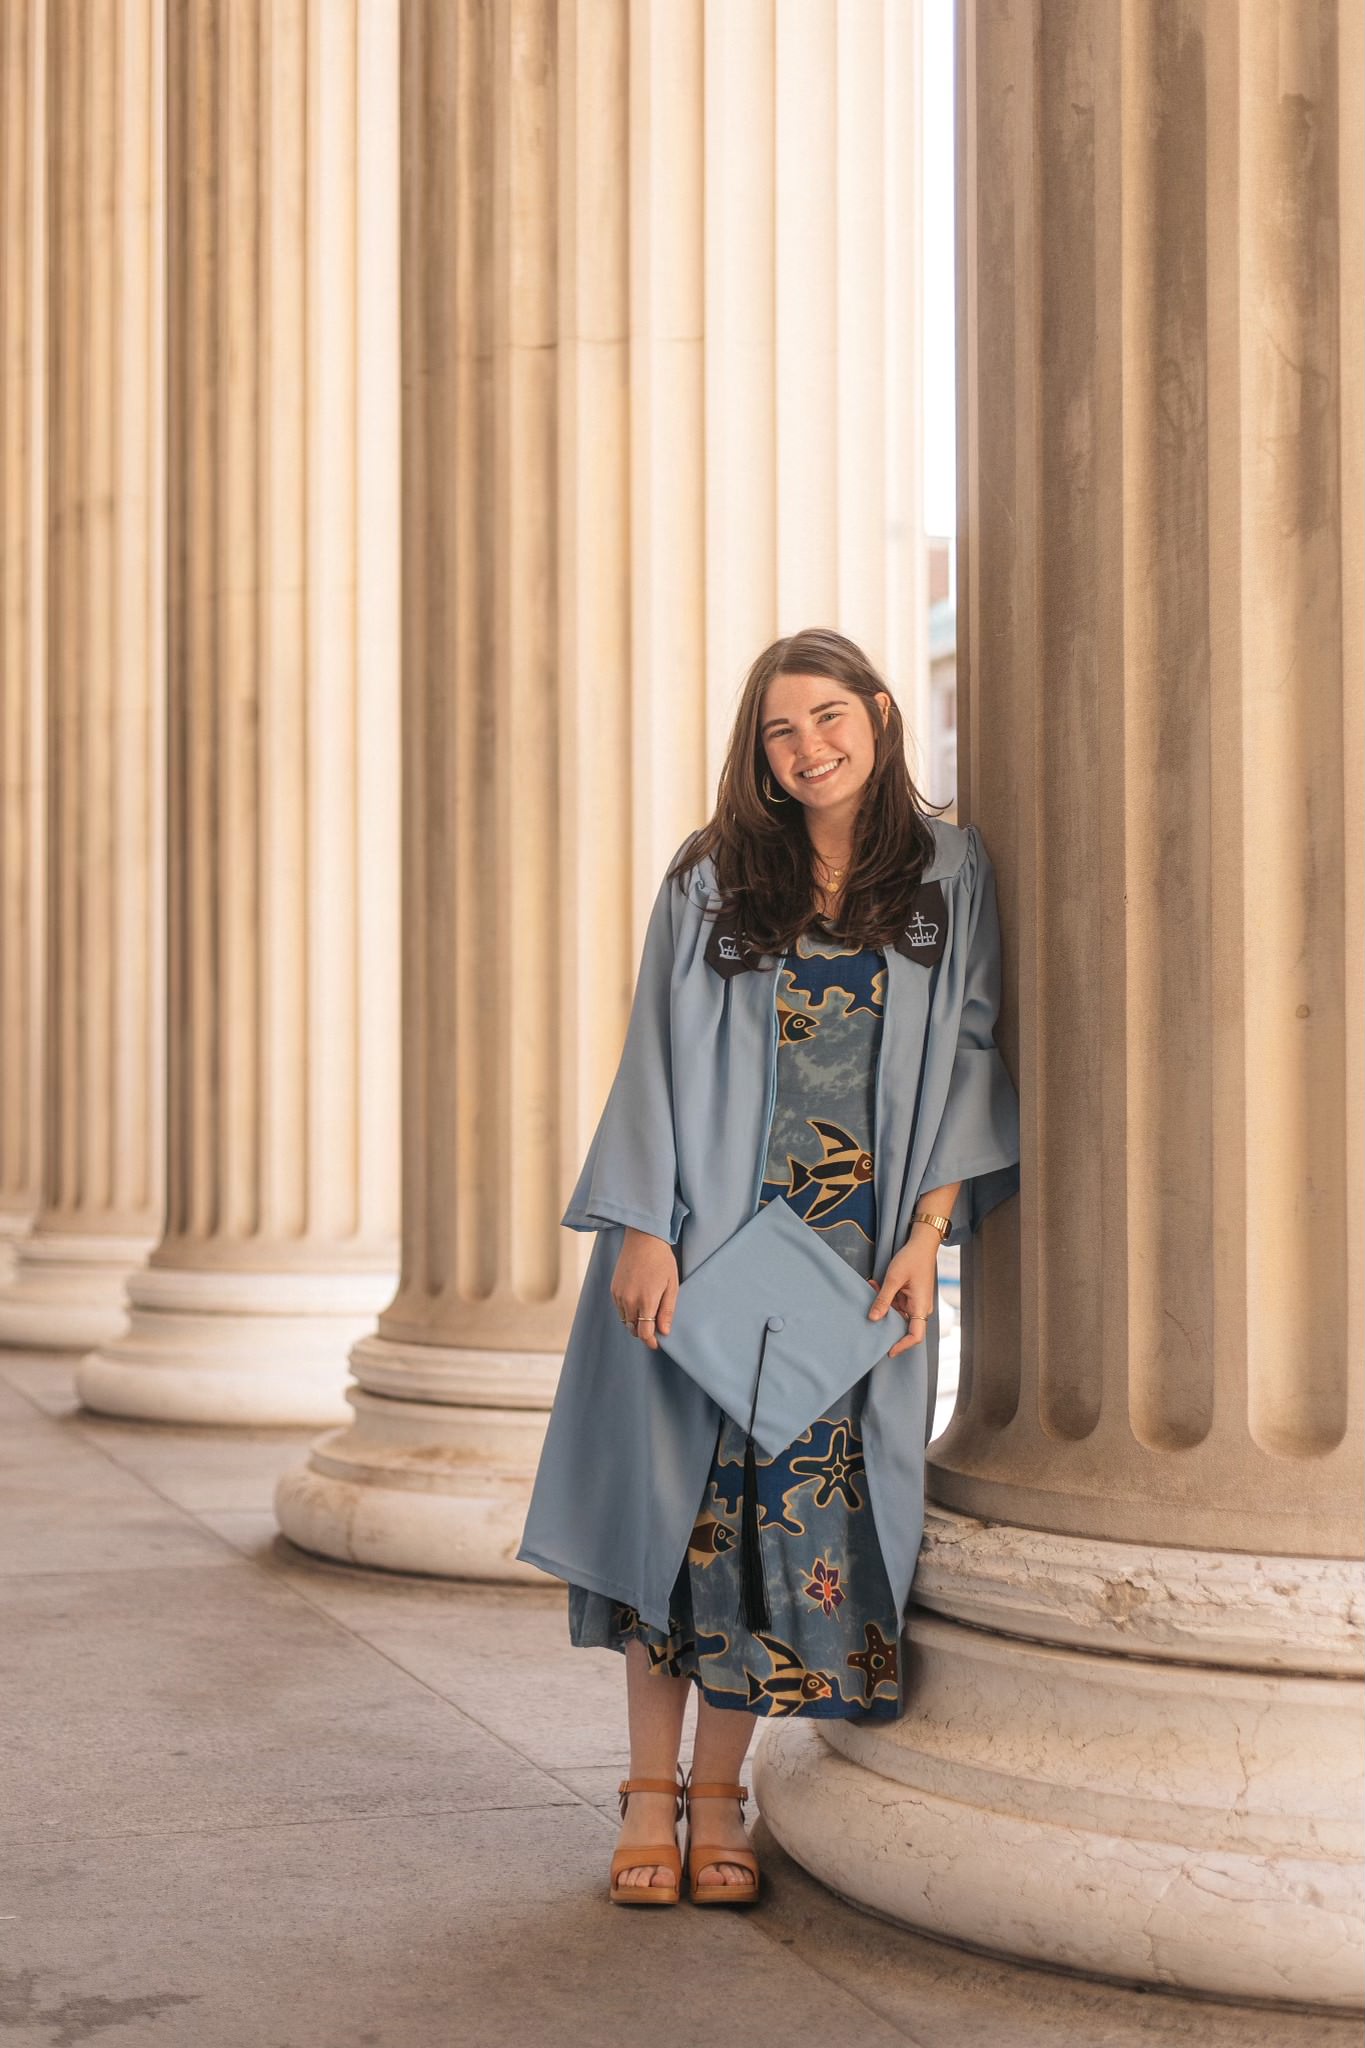 Dani in her cap and gown leading on a large column on Columbia's campus